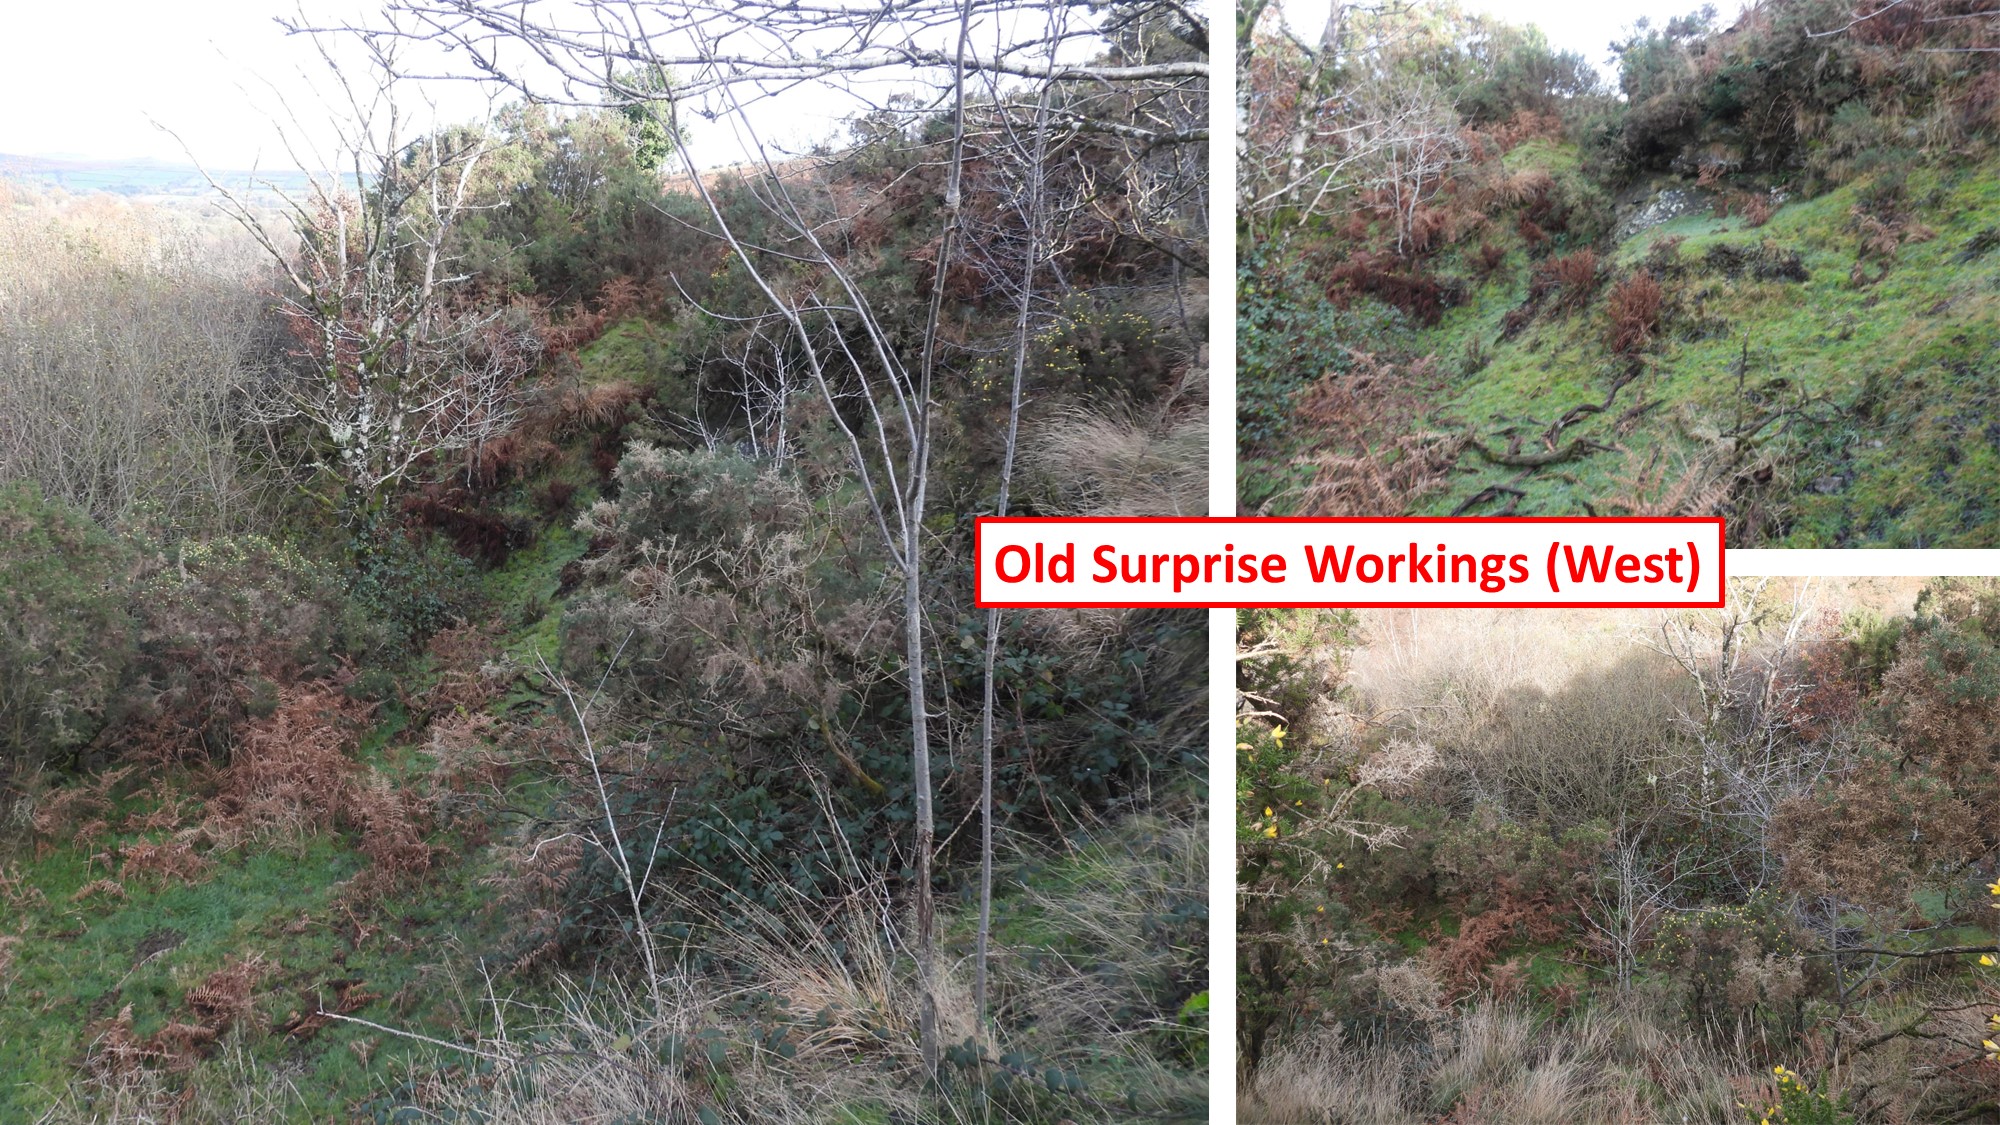 39. Old Surprise Workings West a